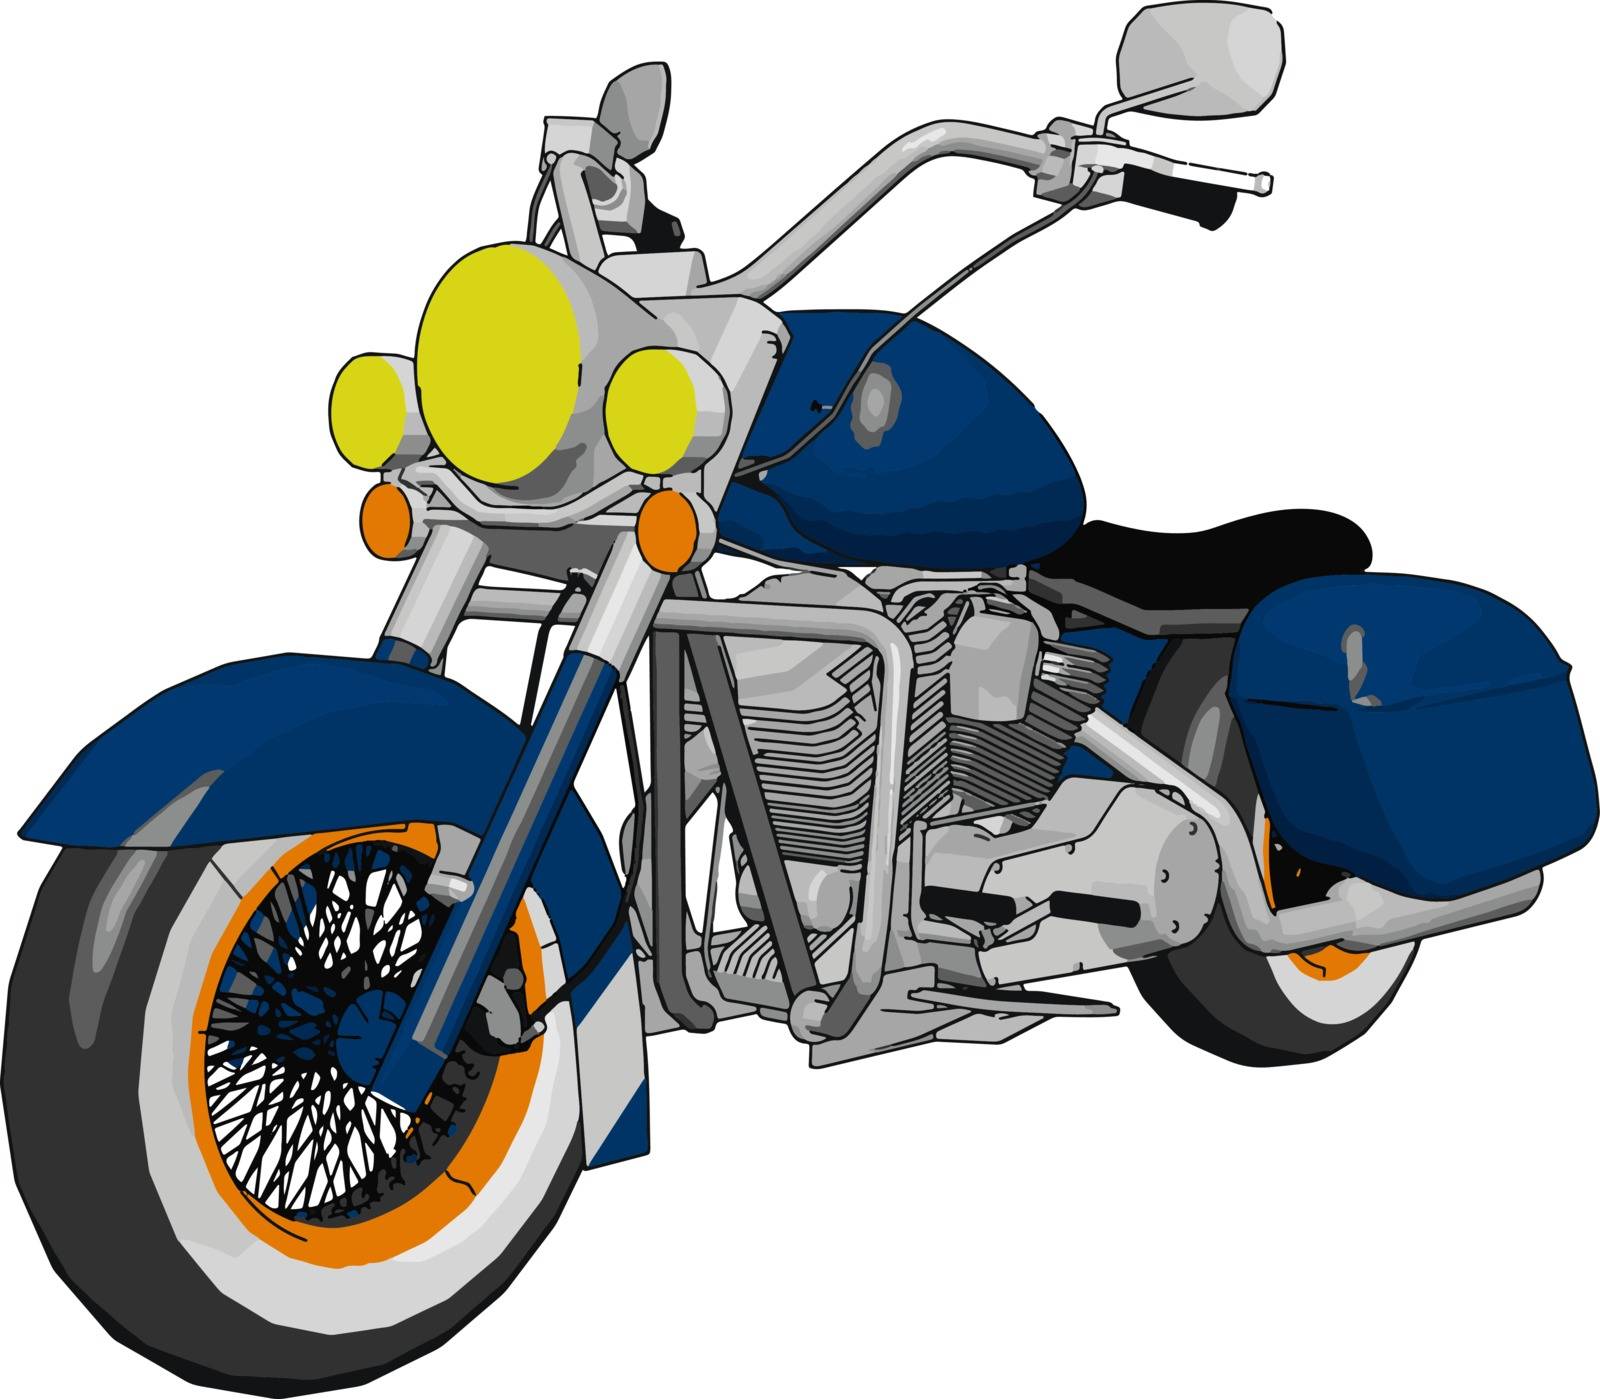 It has two wheels like bicycle and motor like car It mainly driven by one person vector color drawing or illustration